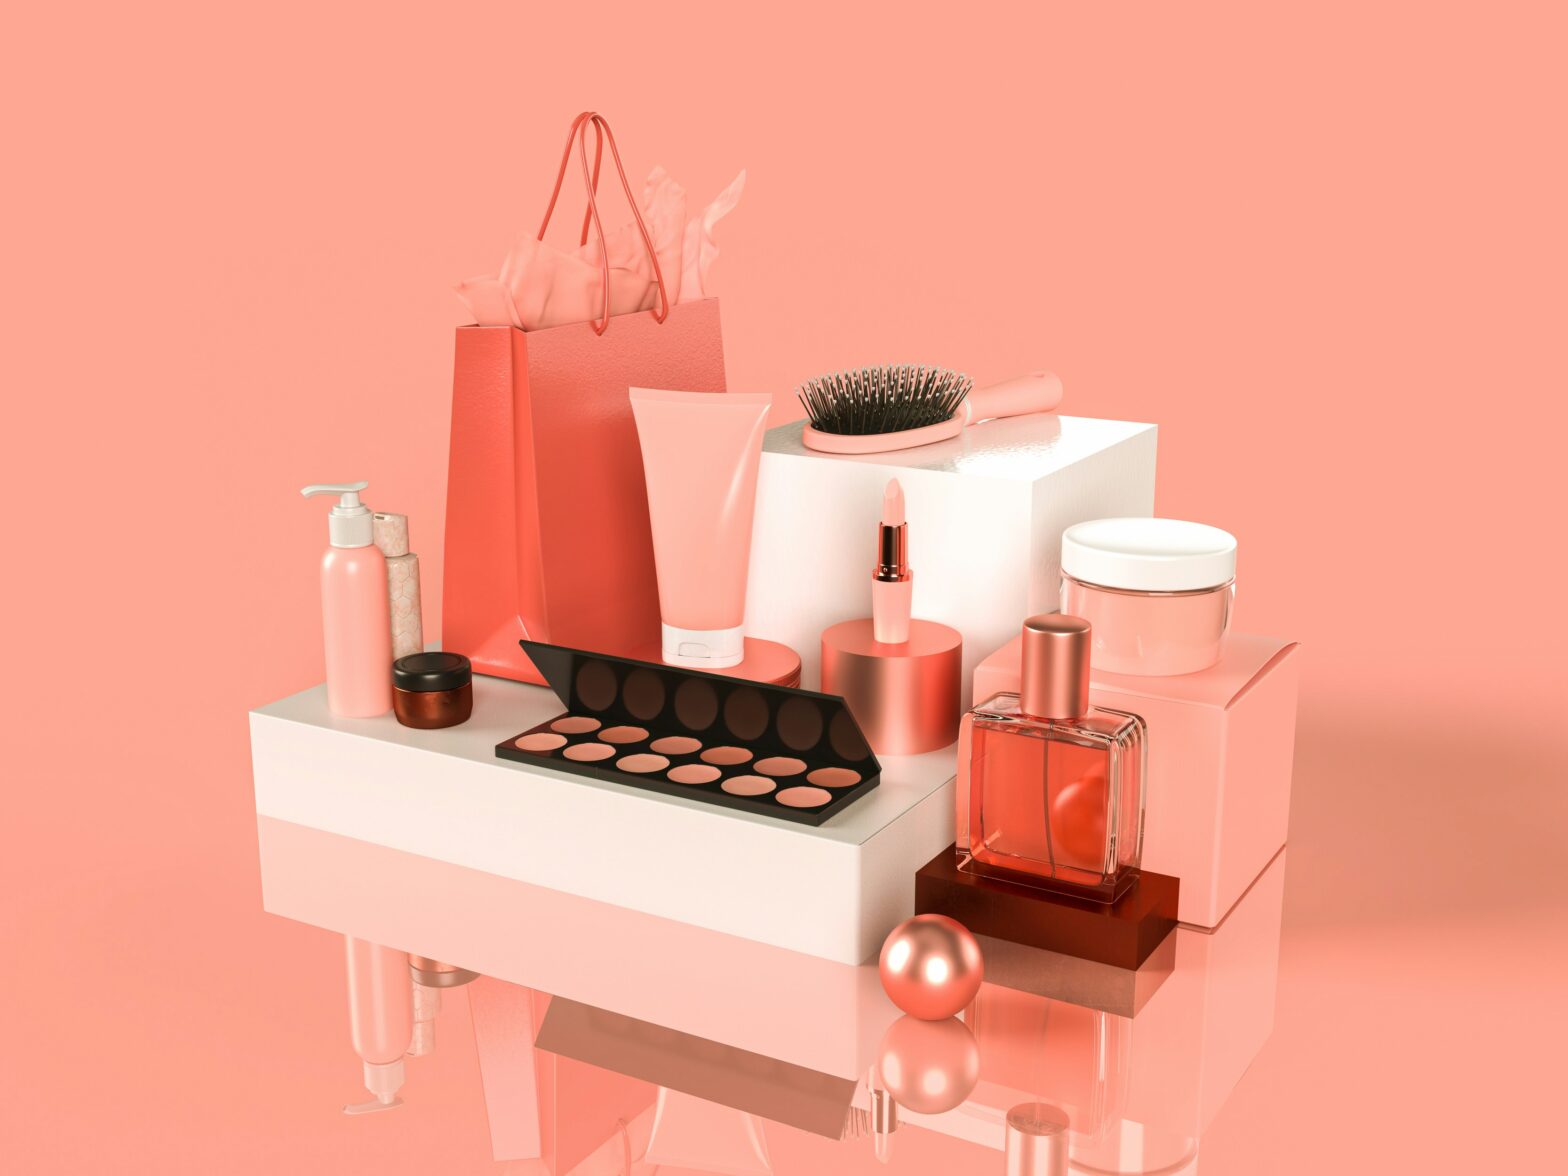 Assortment of beauty products in front of a peach background